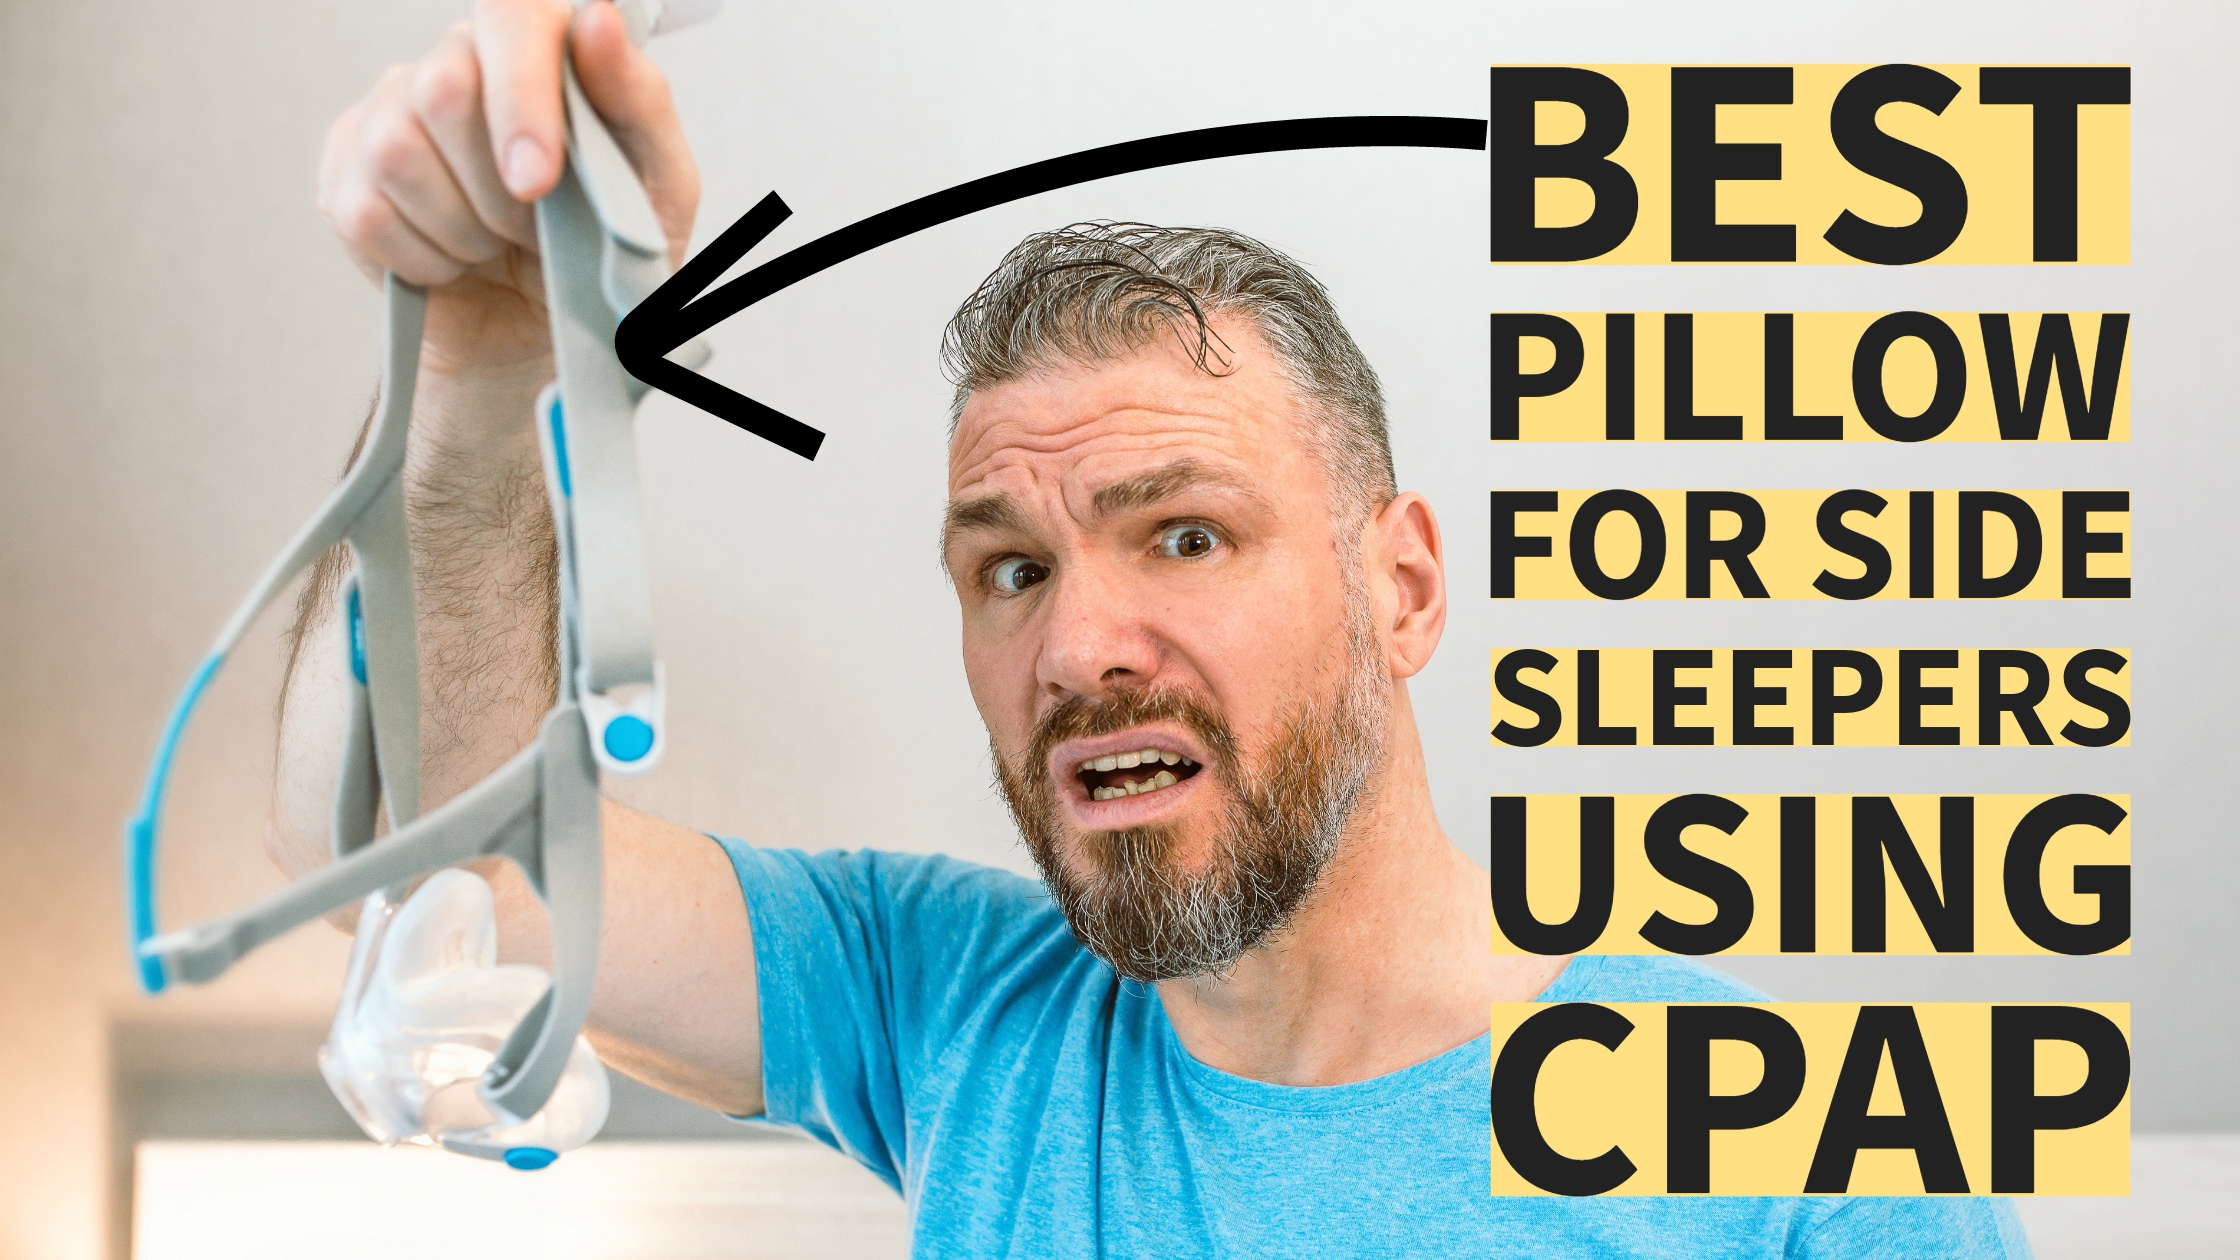 Best Pillow for Side Sleepers Using CPAP: A Comprehensive Guide